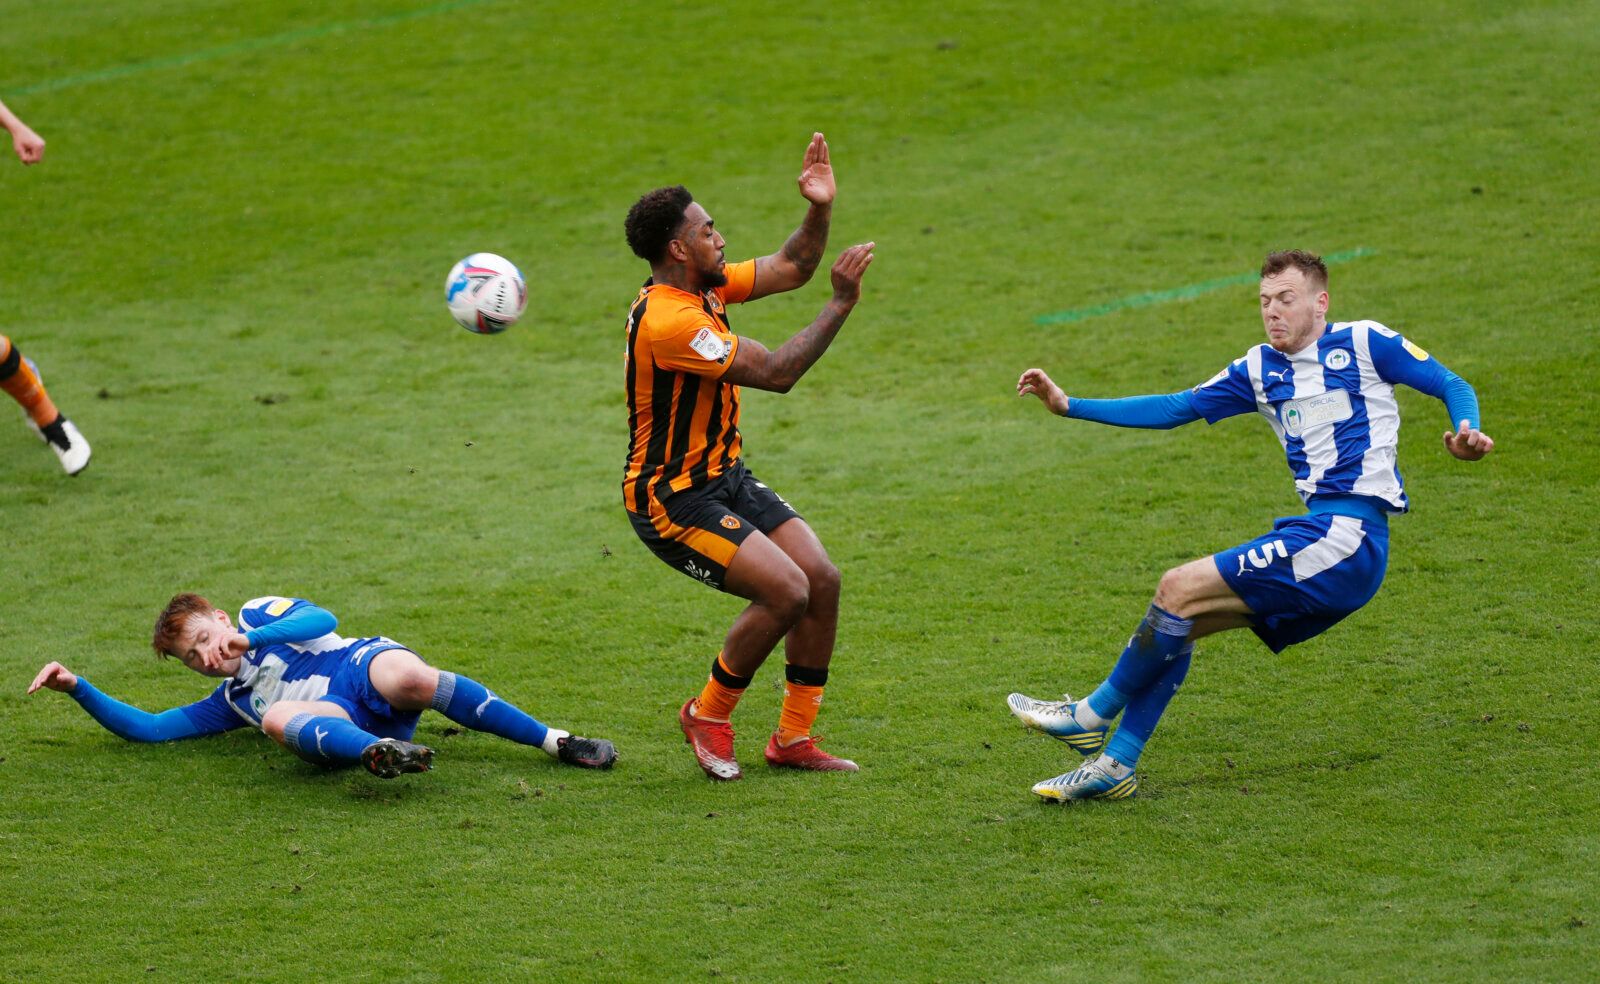 Soccer Football - League One - Hull City v Wigan Athletic - KCOM Stadium, Hull, Britain - May 1, 2021 Hull City's Malik Wilks in action with Wigan's Luke Robinson and George Johnston Action Images/Lee Smith EDITORIAL USE ONLY. No use with unauthorized audio, video, data, fixture lists, club/league logos or 'live' services. Online in-match use limited to 75 images, no video emulation. No use in betting, games or single club /league/player publications.  Please contact your account representative 